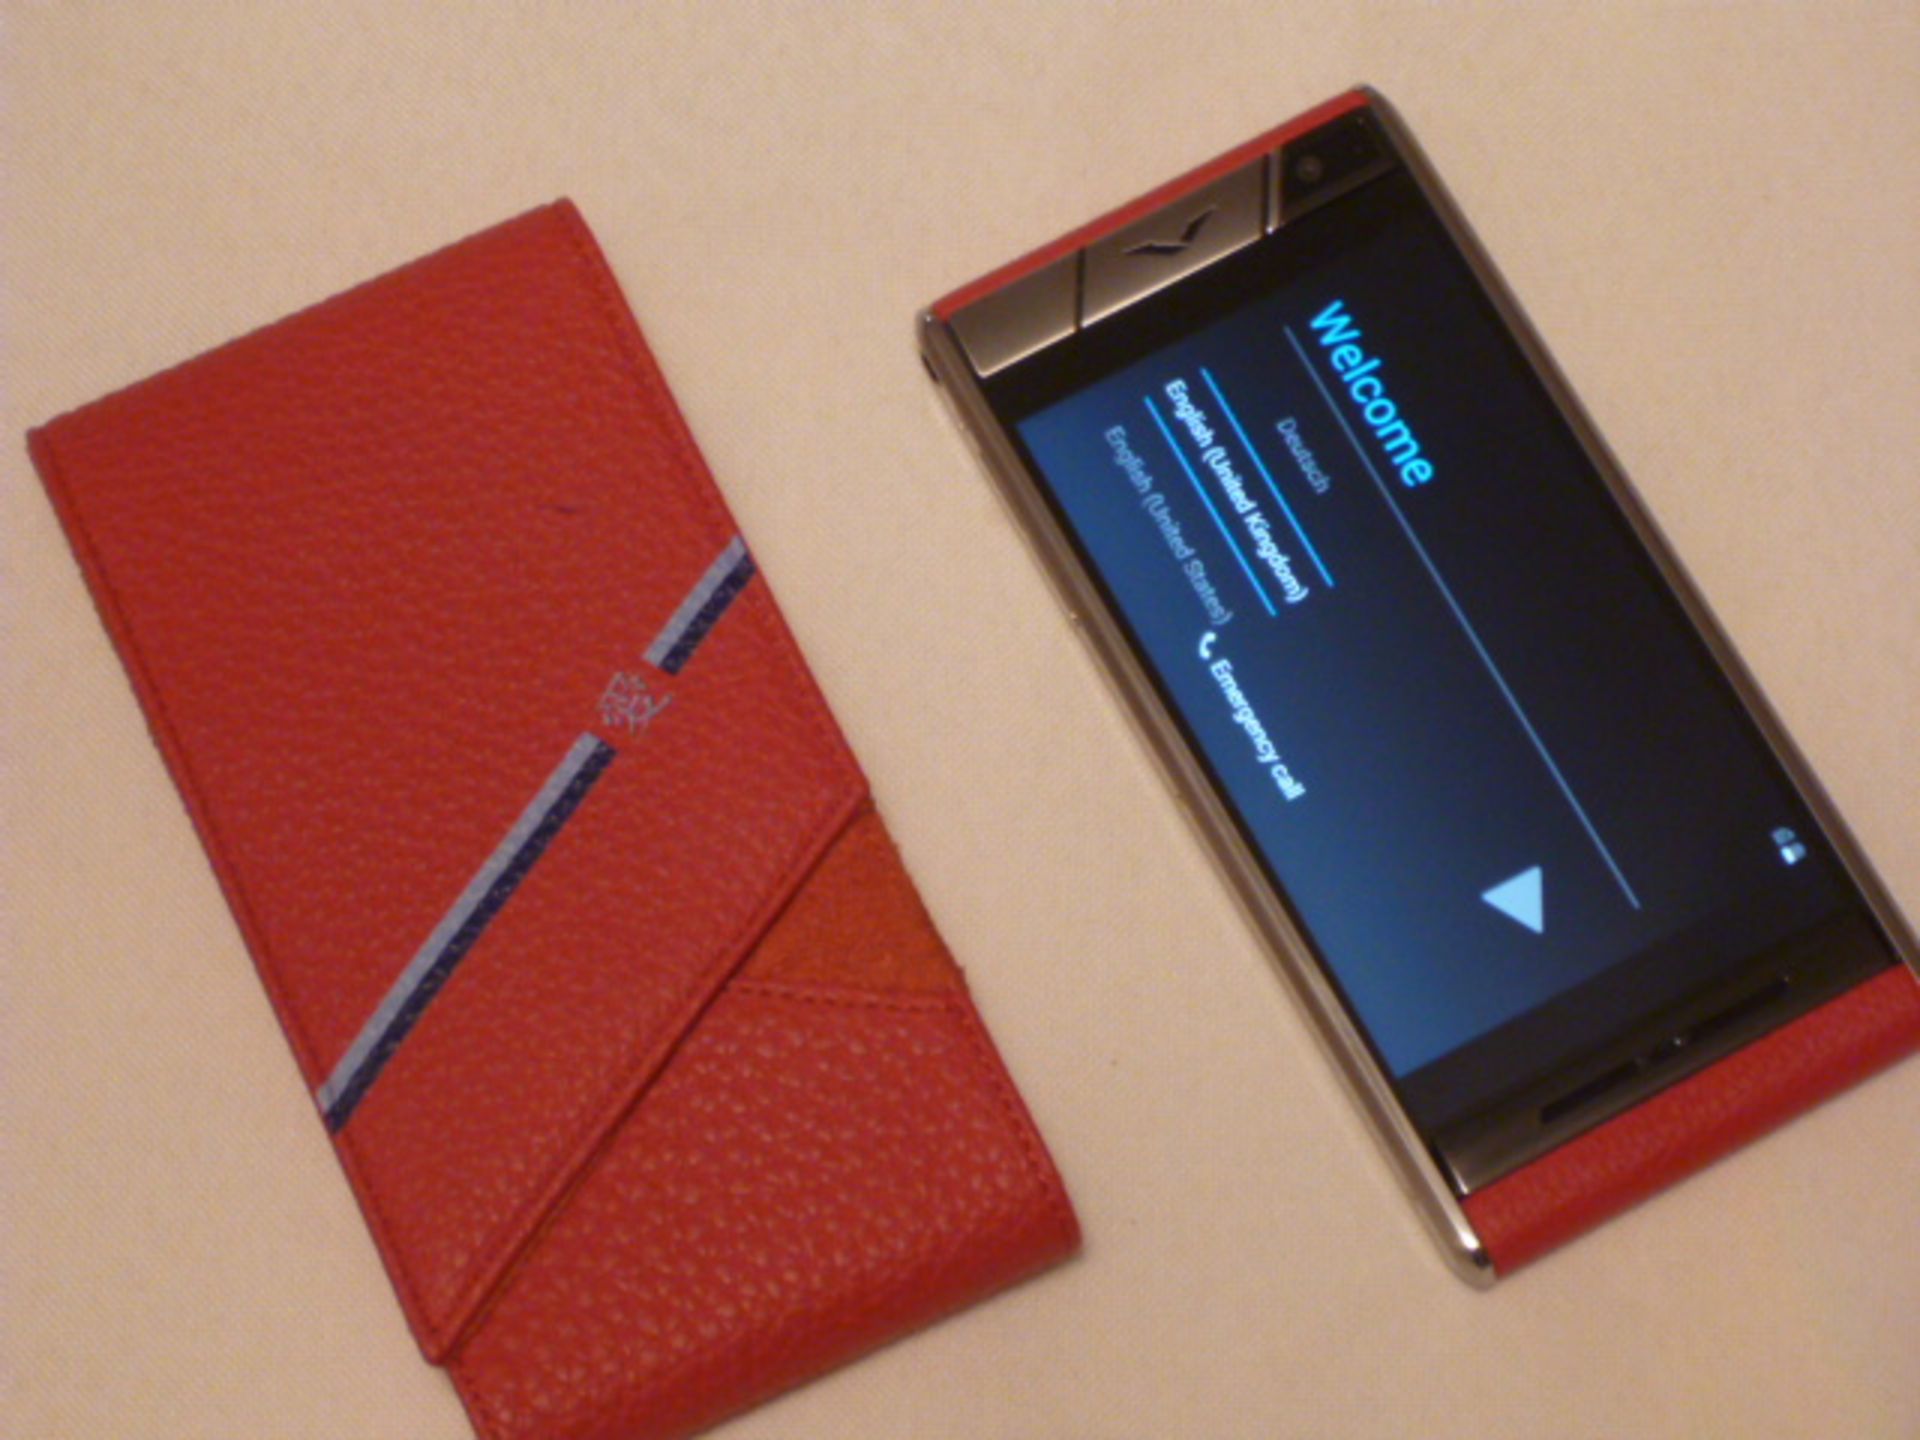 Vertu Aster Touch Phone, Pink Leather. Demonstrator, S/N I-005601. Comes with Matching Leather